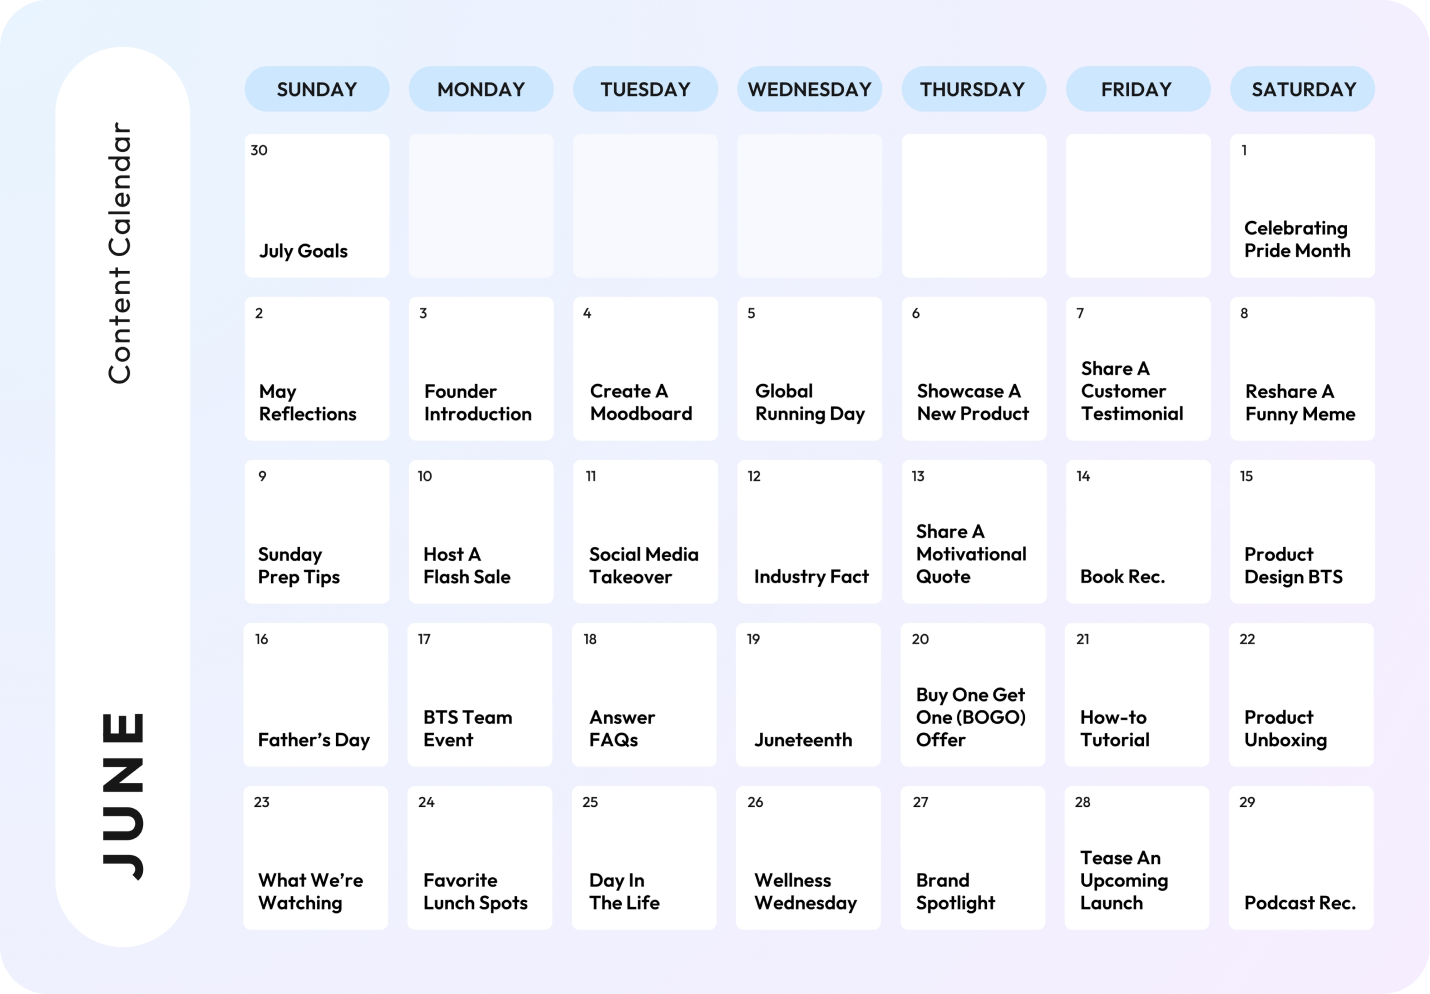 June content calendar with daily themes including Celebrating Pride Month, Founder Introduction, Global Running Day, Father's Day, Juneteenth, and more. Themes range from customer testimonials and flash sales to product showcases and motivational quotes | Social media planner | plannthat.com